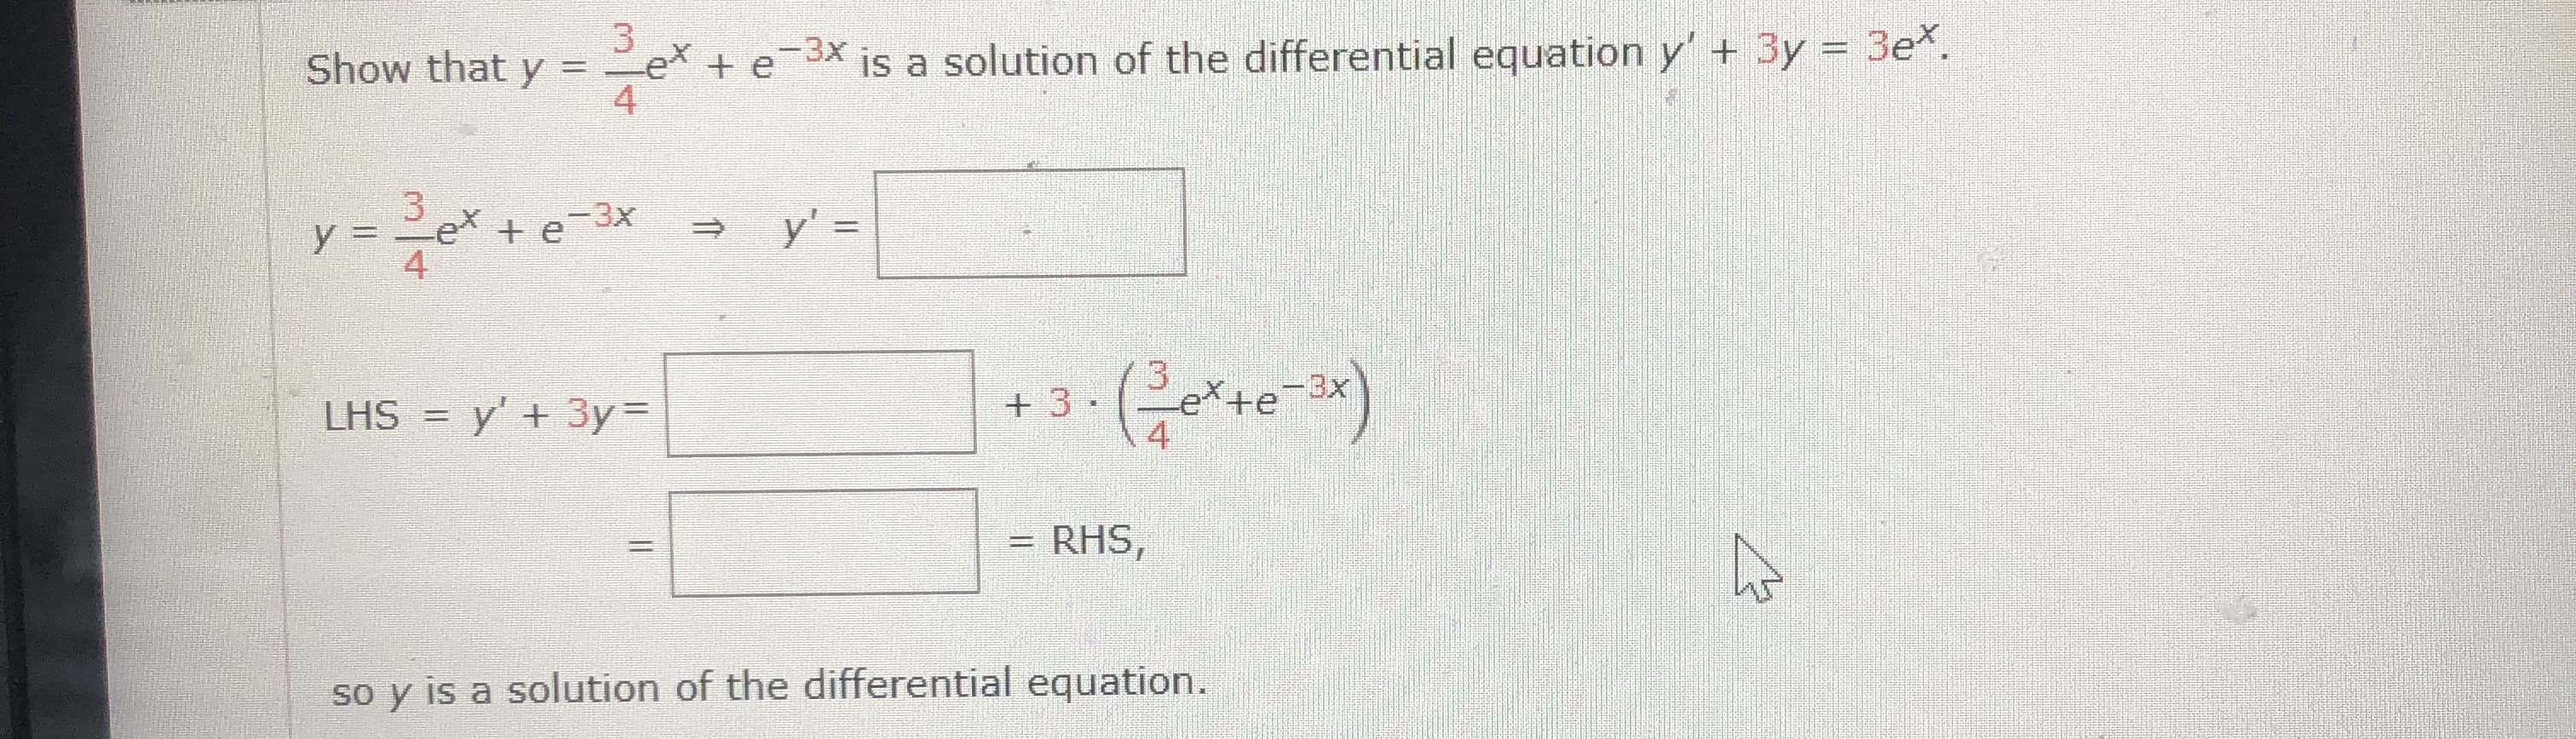 Show that y =
3x
et
+e-3x
is a solution of the differential equation y' + 3y = 3ex.
4
y = 2ex + e-3x
4
y' =
%3D
%3D
3
LHS = y' + 3y =
+ 3·
ex
-3x
4
RHS,
%D
so y is a solution of the differential equation.
